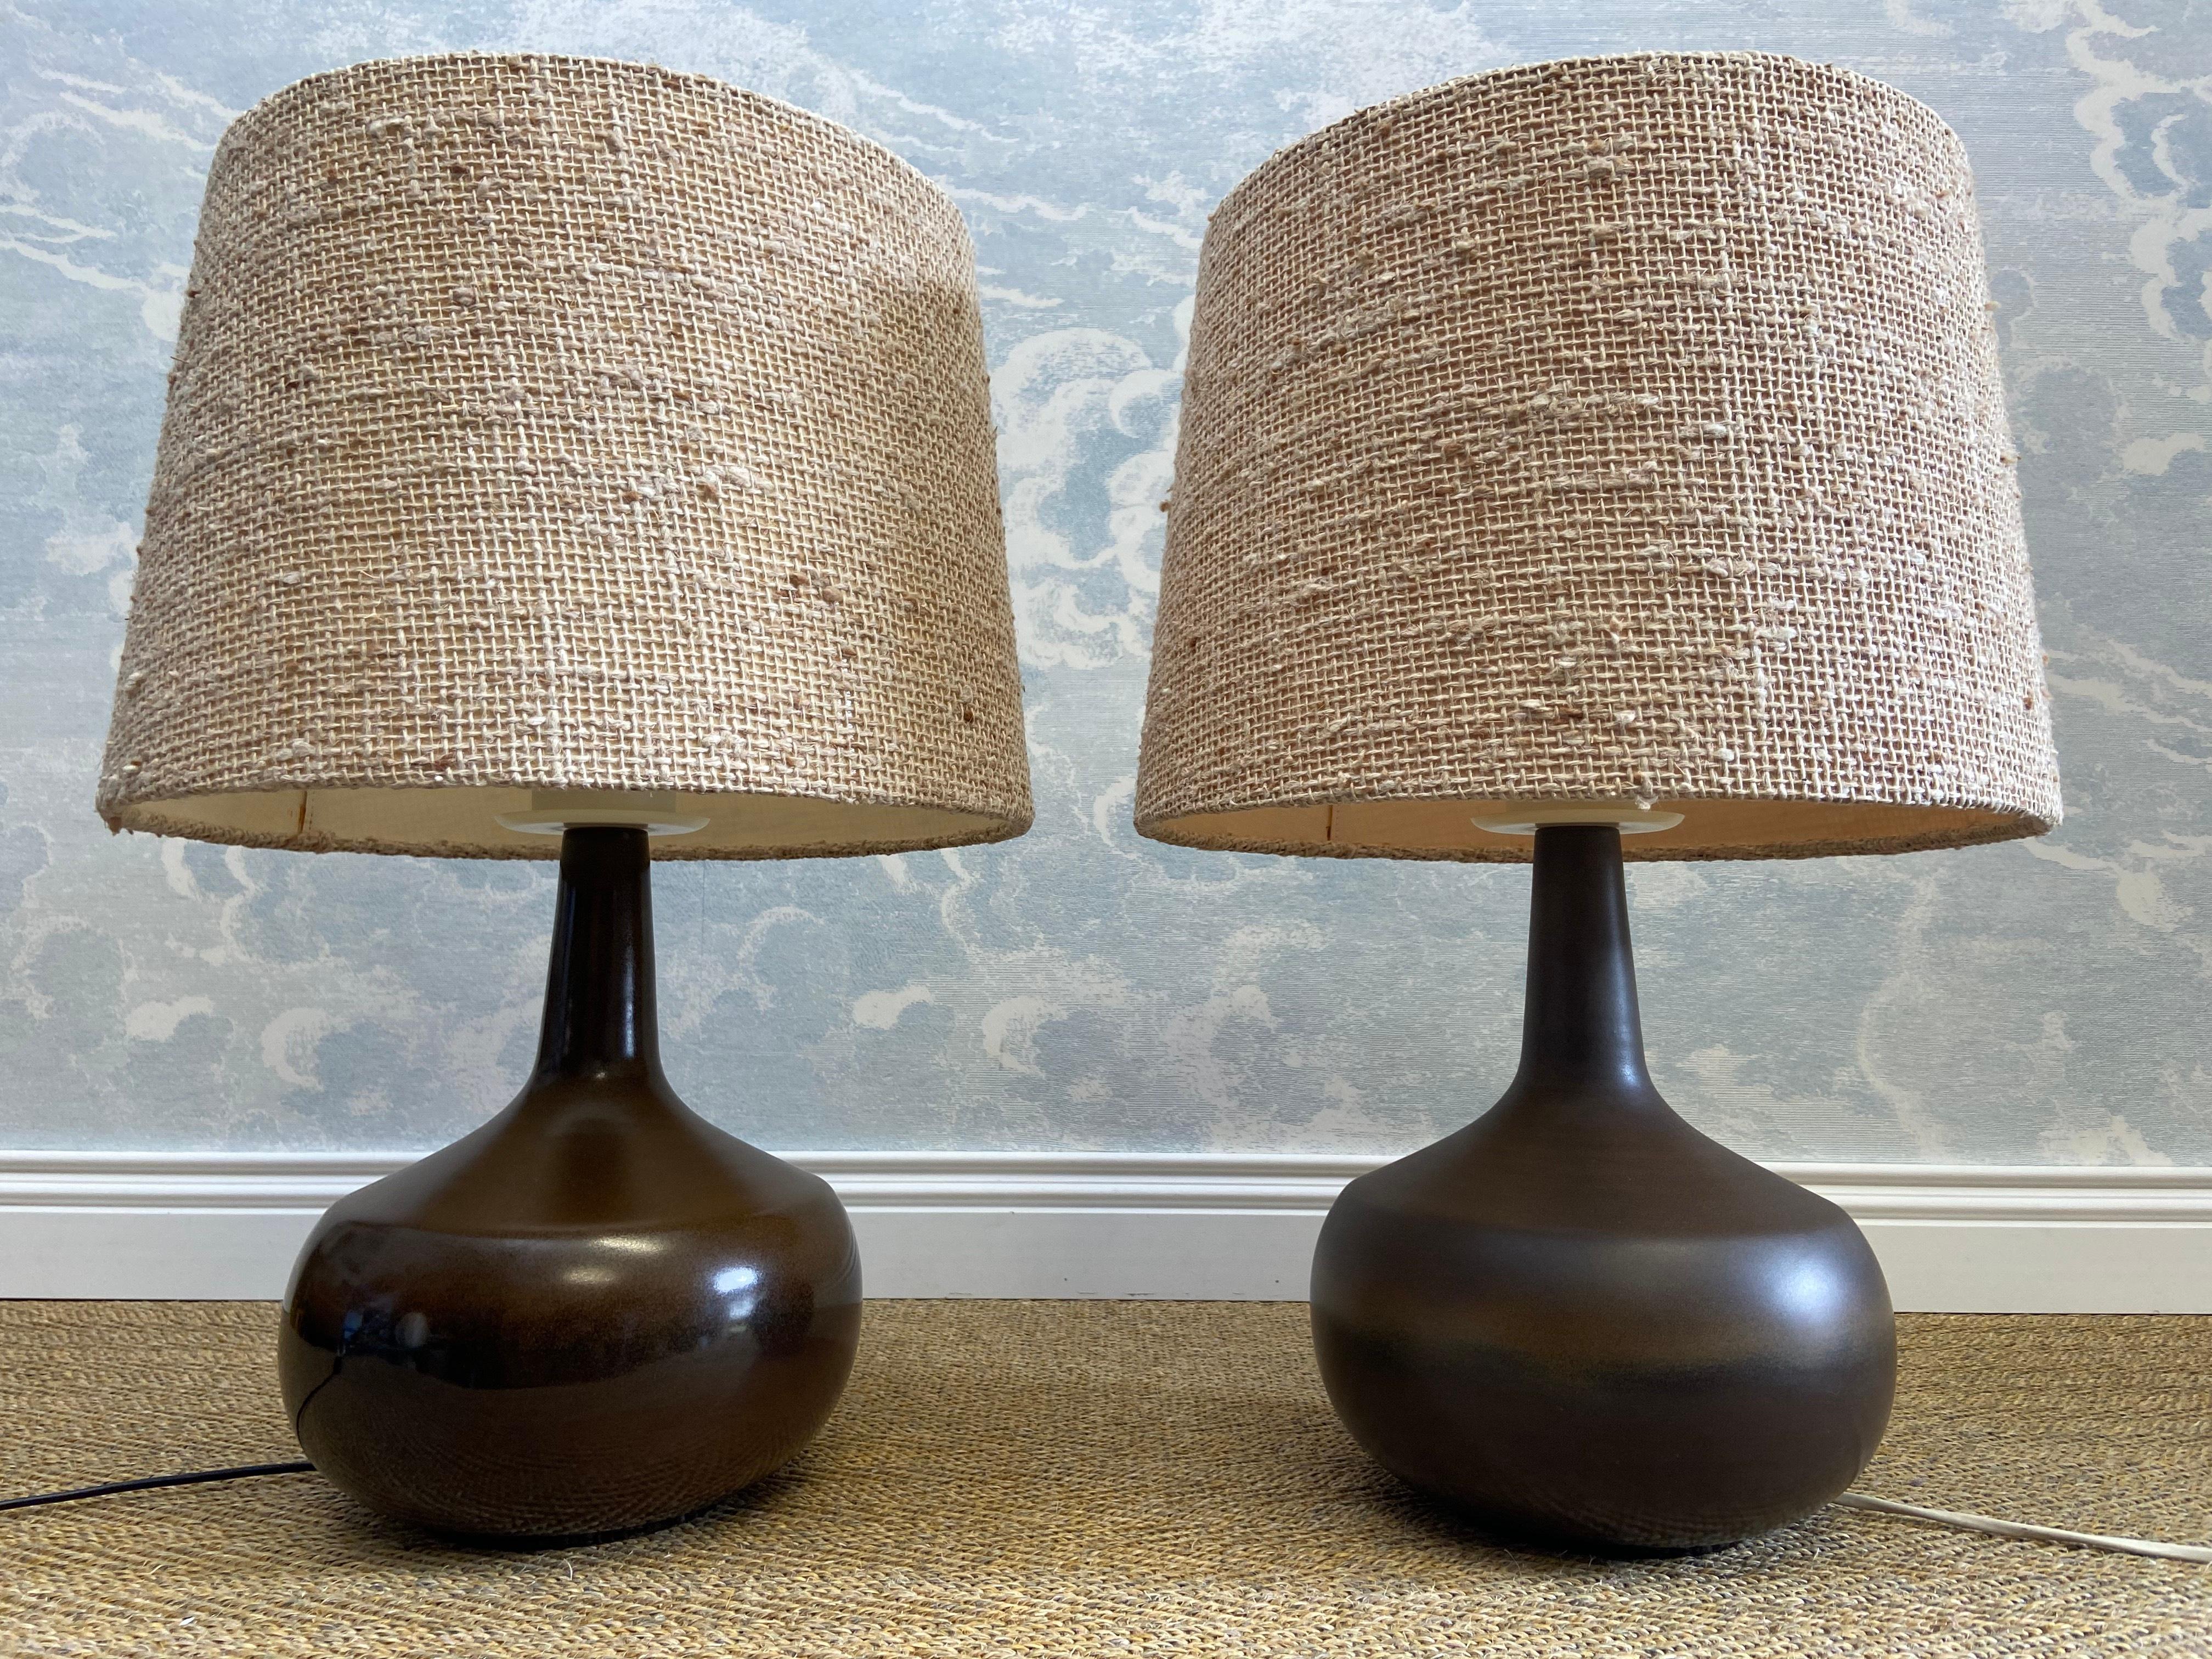 Pair of Rosenthal Studio Line Ceramic Table Lamps Tuscan Brown, Germany, 1960's For Sale 4